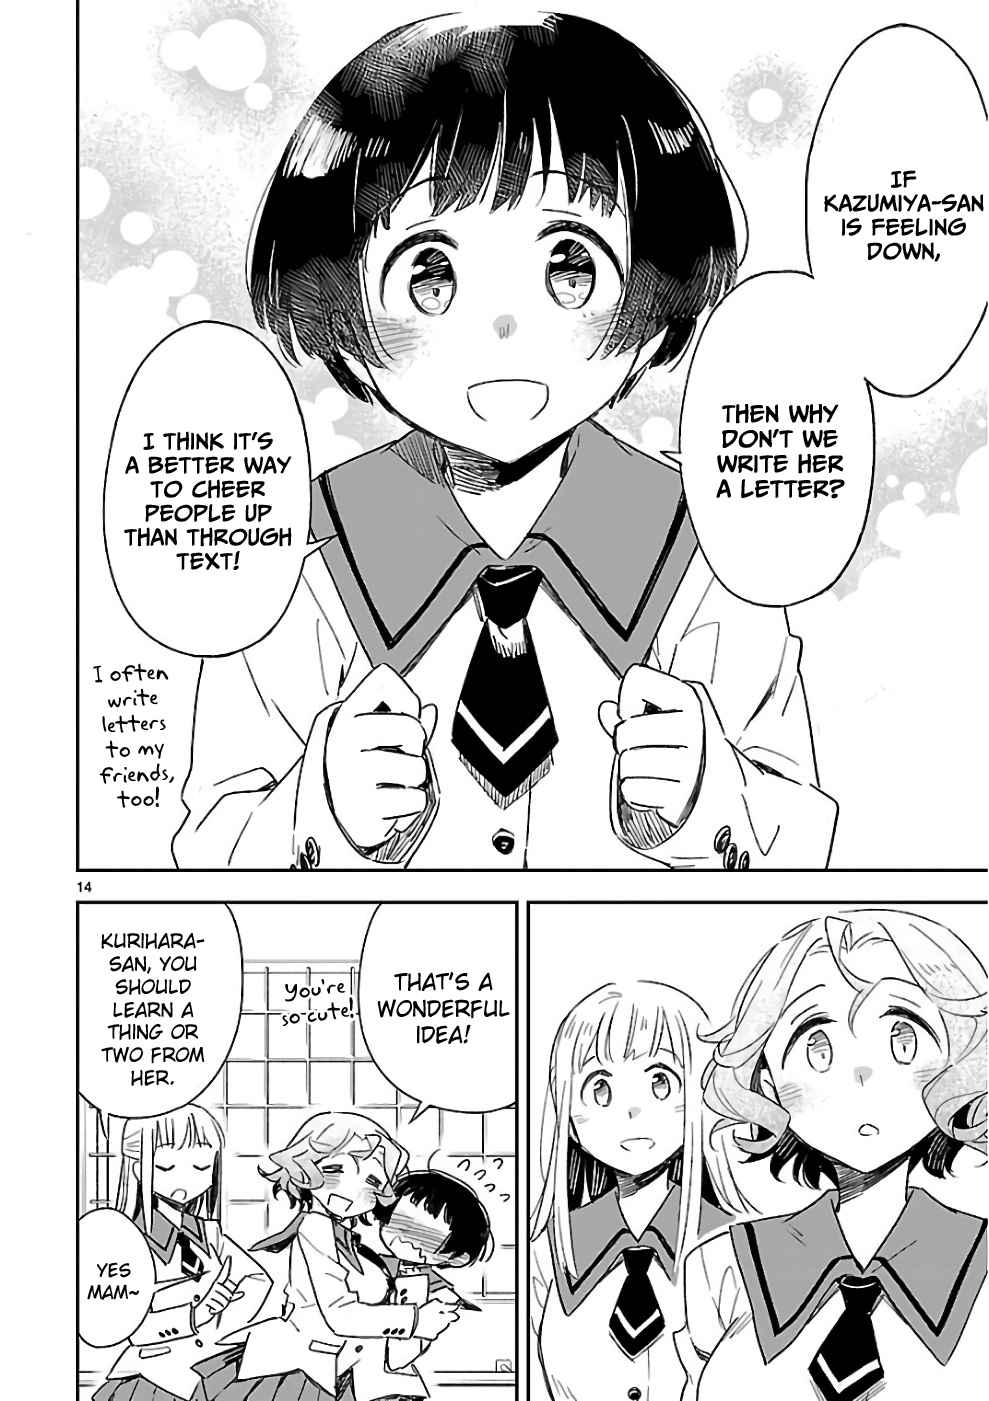 Omaera Zenin Mendokusai! Vol. 8 Ch. 38 You'll realize only when you actually put them into words